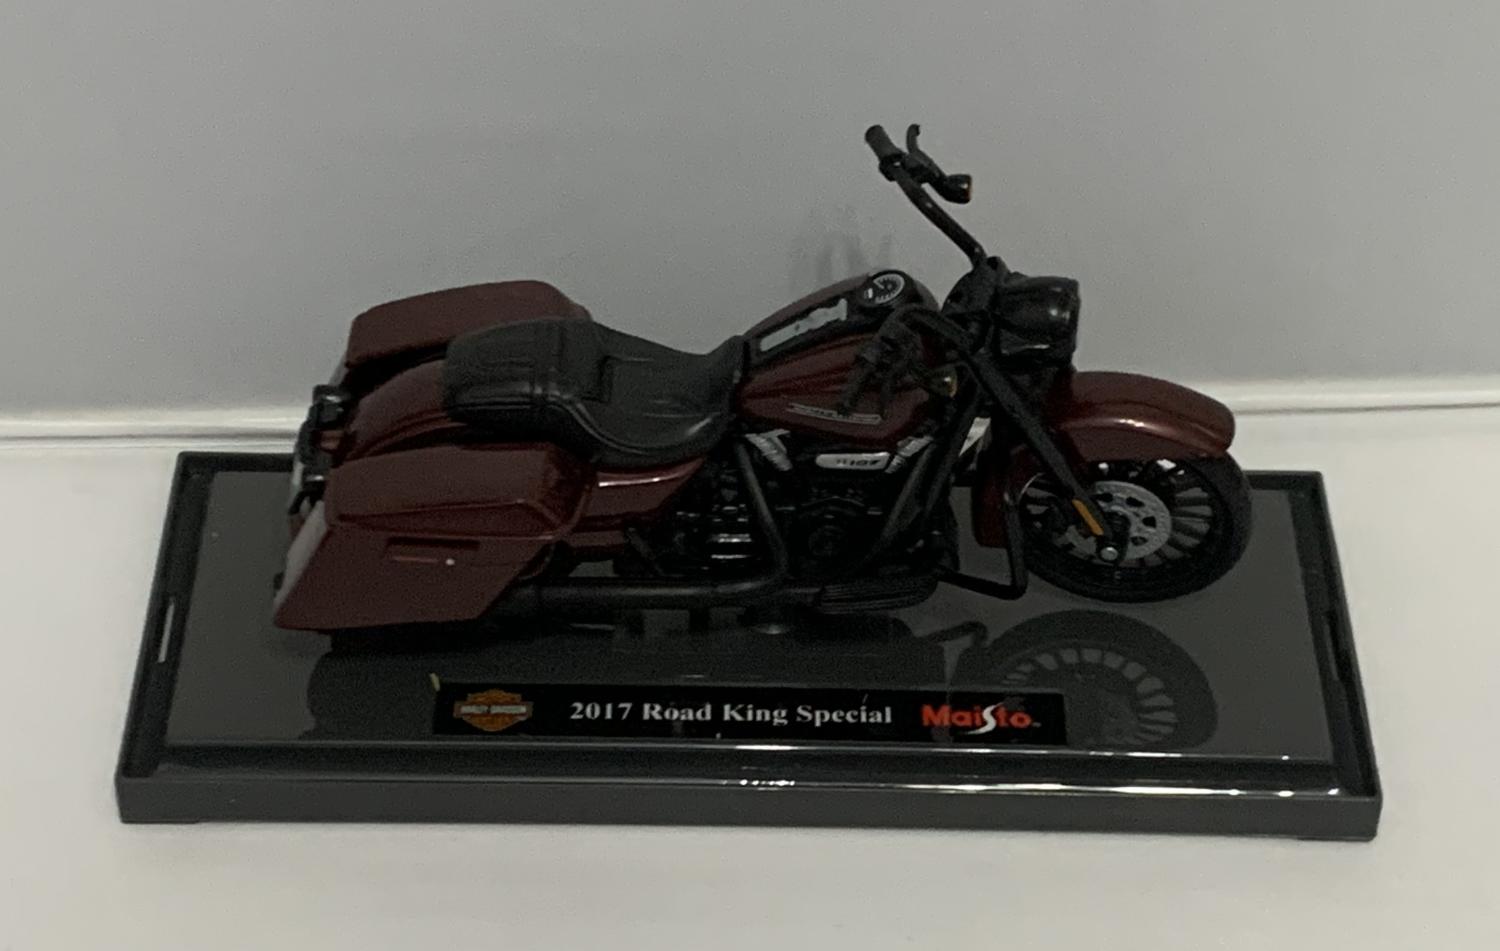 Harley Davidson 2017 Road King Special in burgundy 1:18 scale model from Maisto